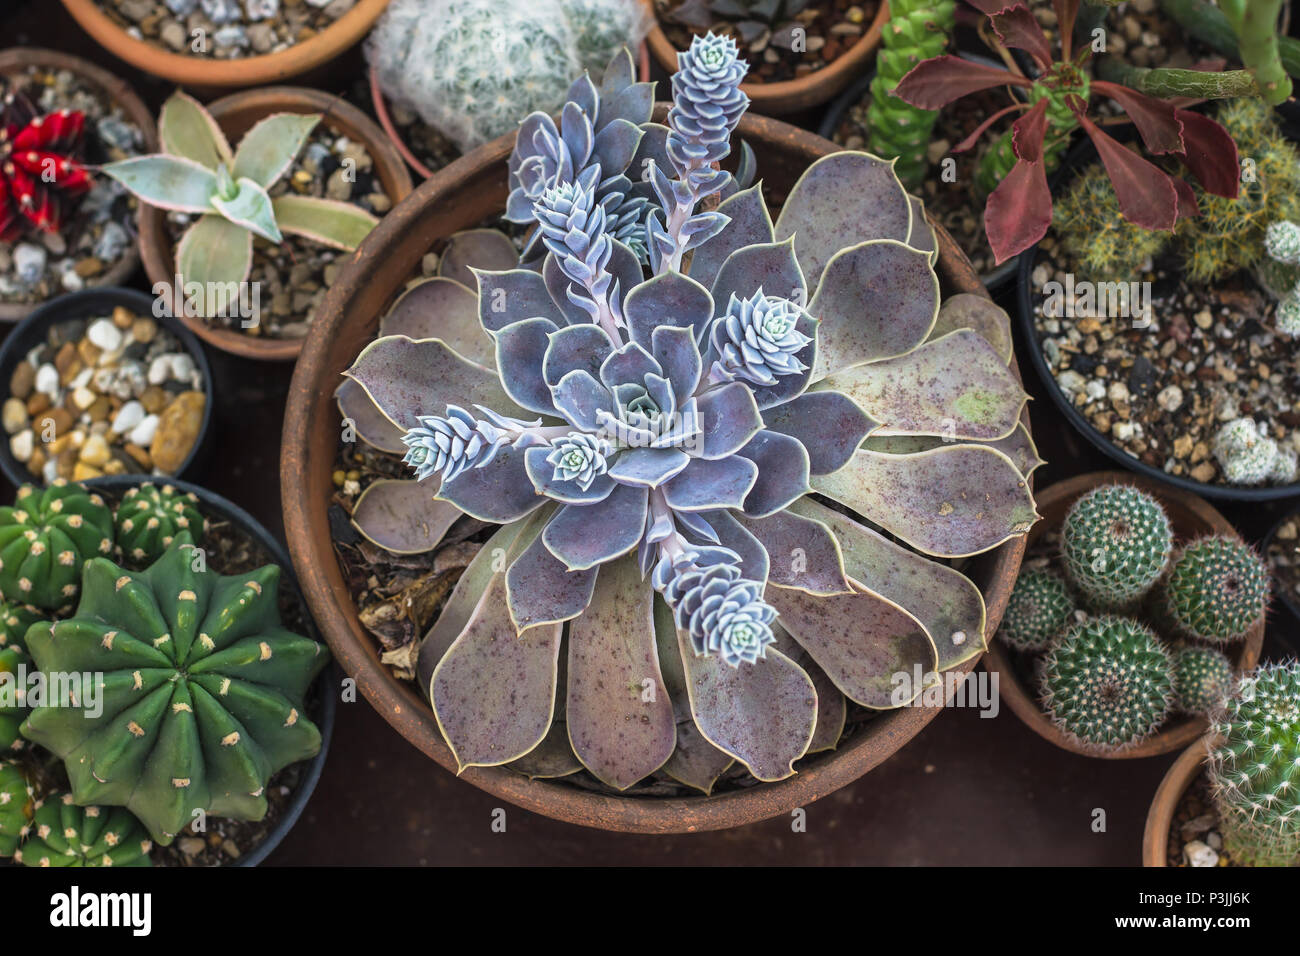 Collection of cactus and succulents plant in the garden. Small cactus and succulent in home garden. Stock Photo